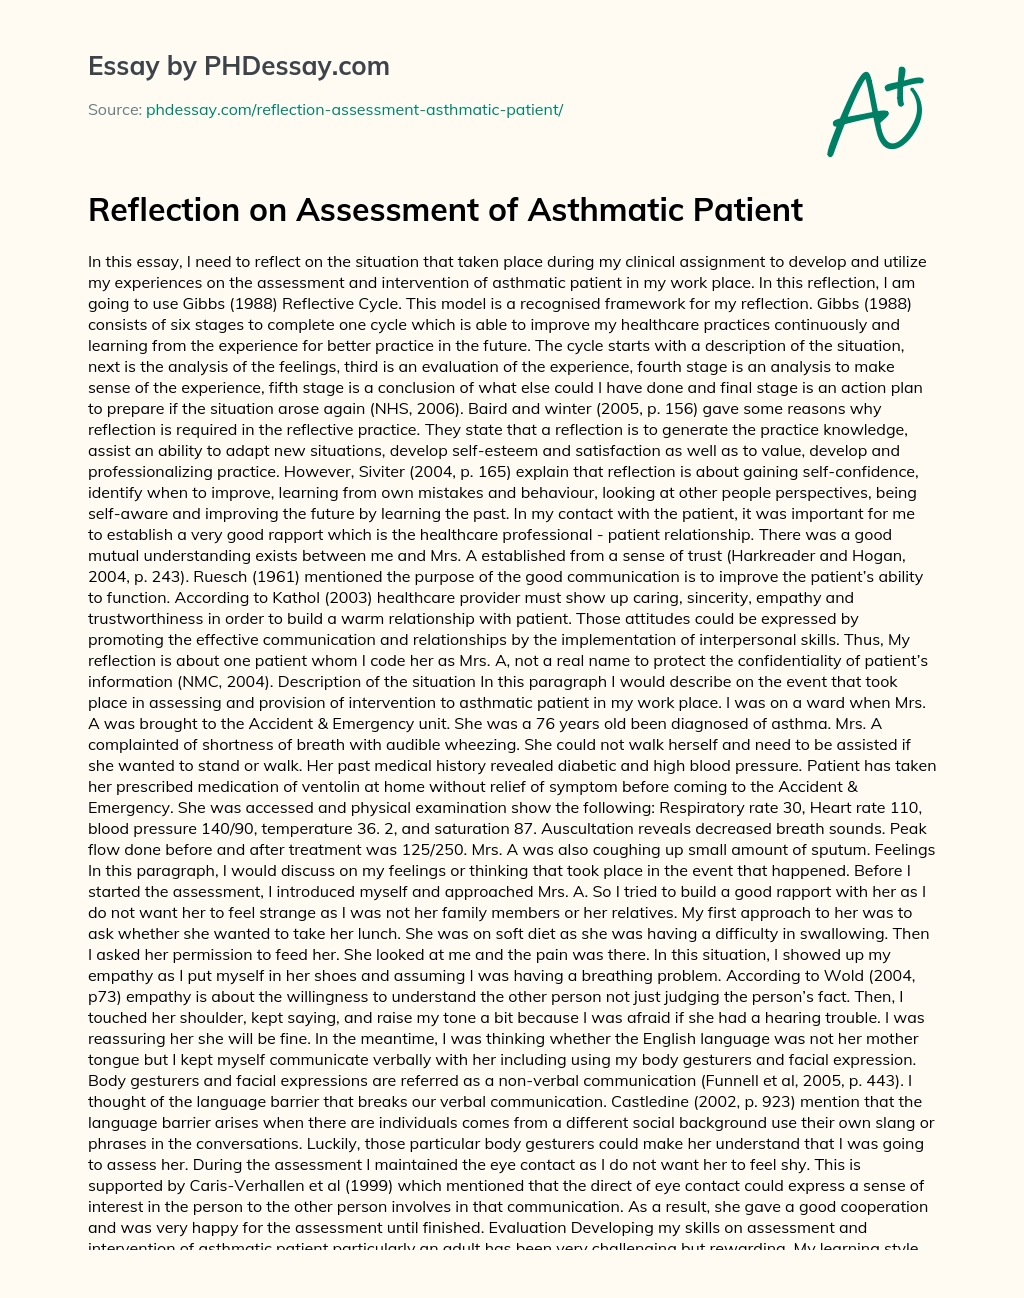 Reflection on Assessment of Asthmatic Patient essay